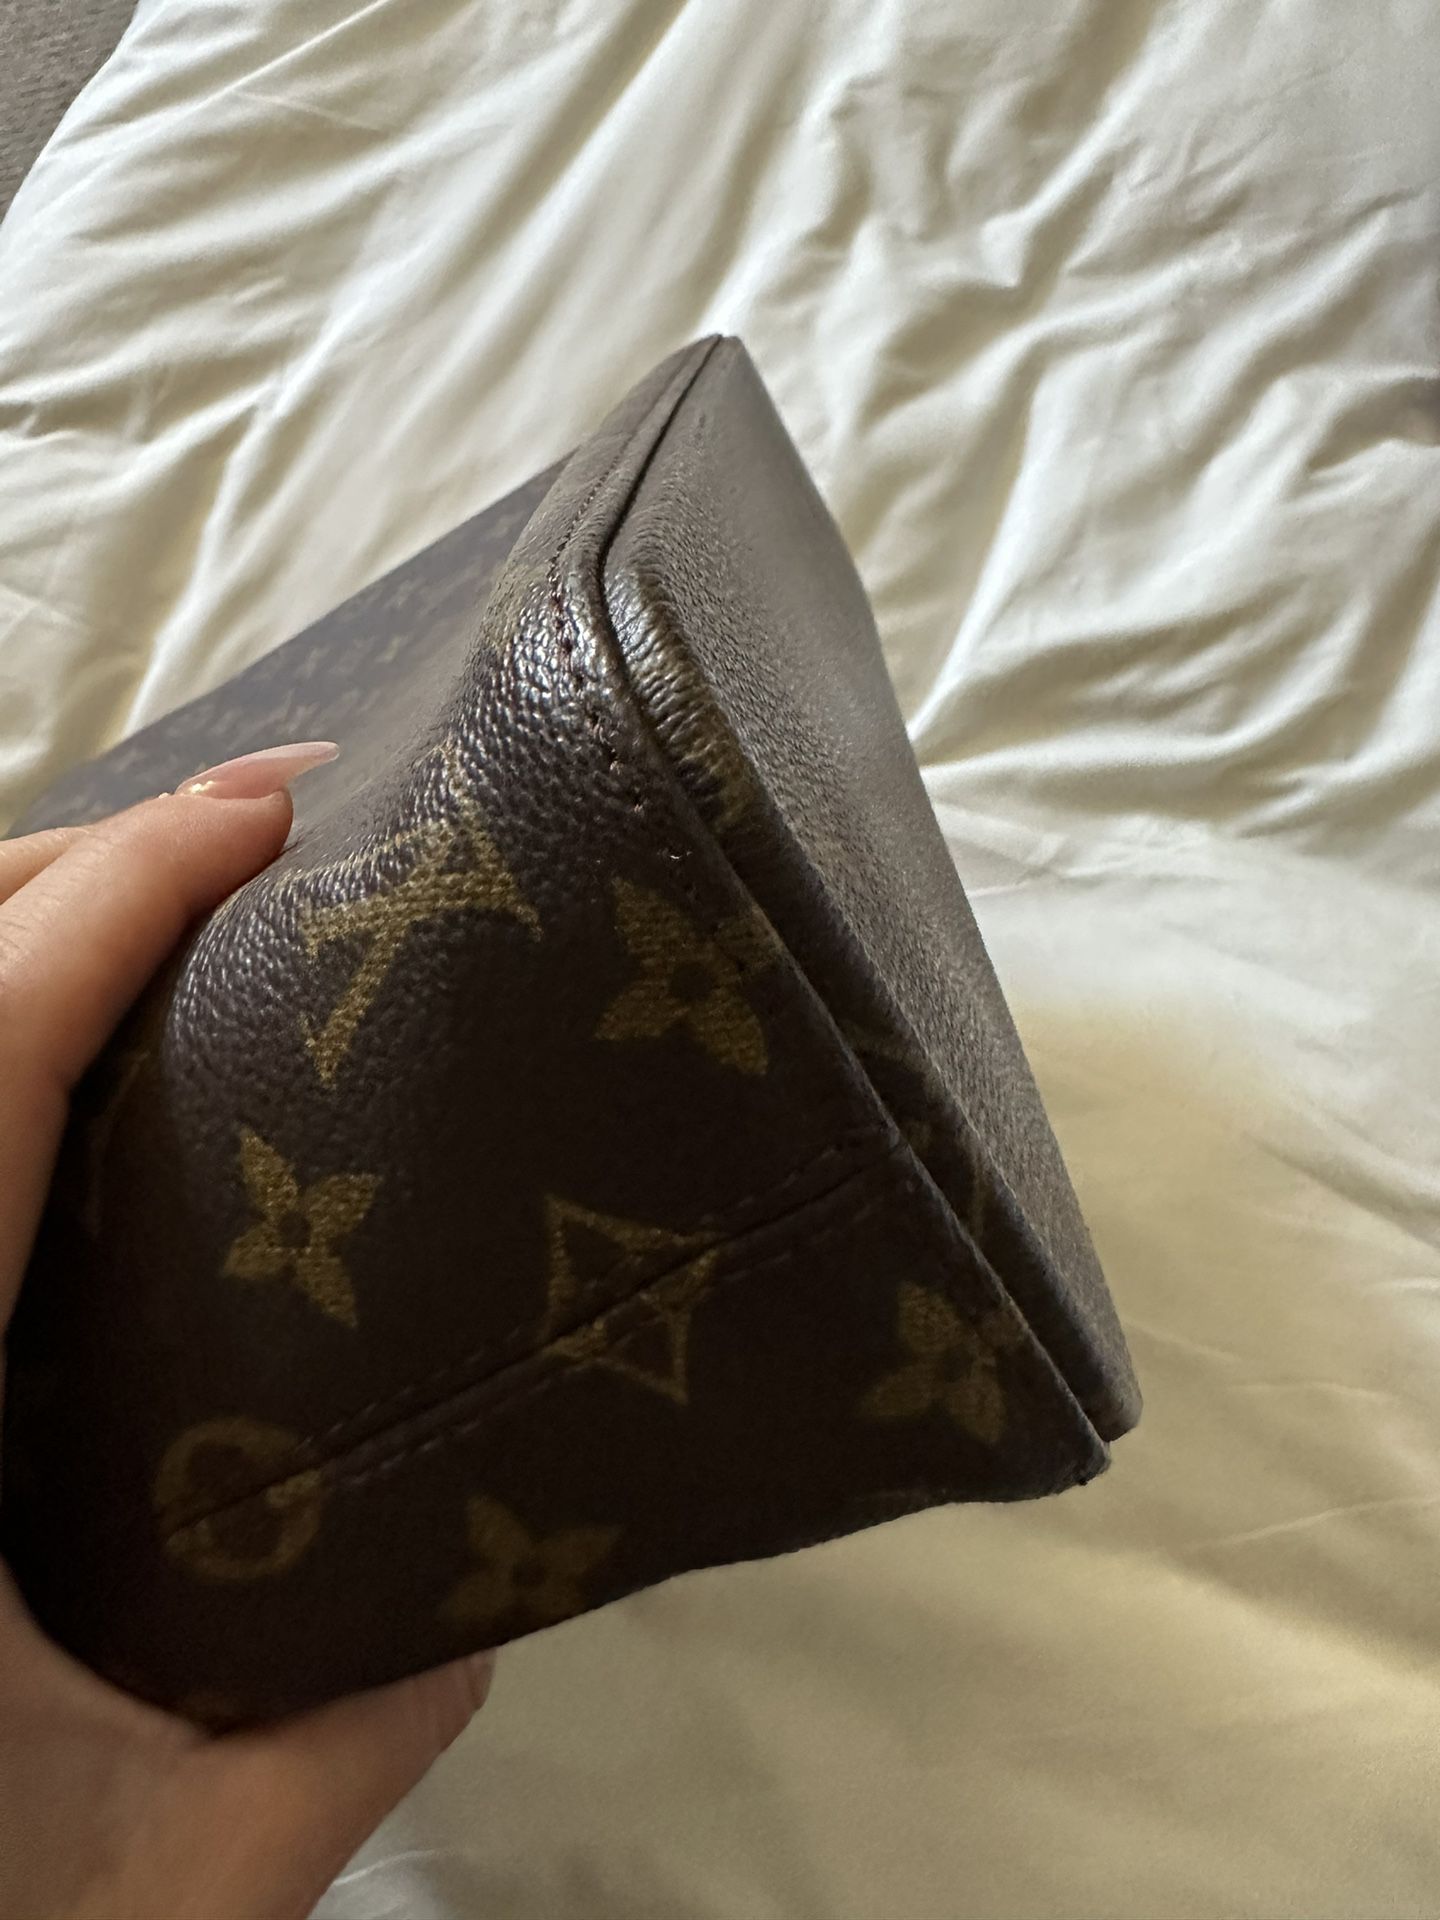 Louis Vuitton Luco Authentic for Sale in San Diego, CA - OfferUp